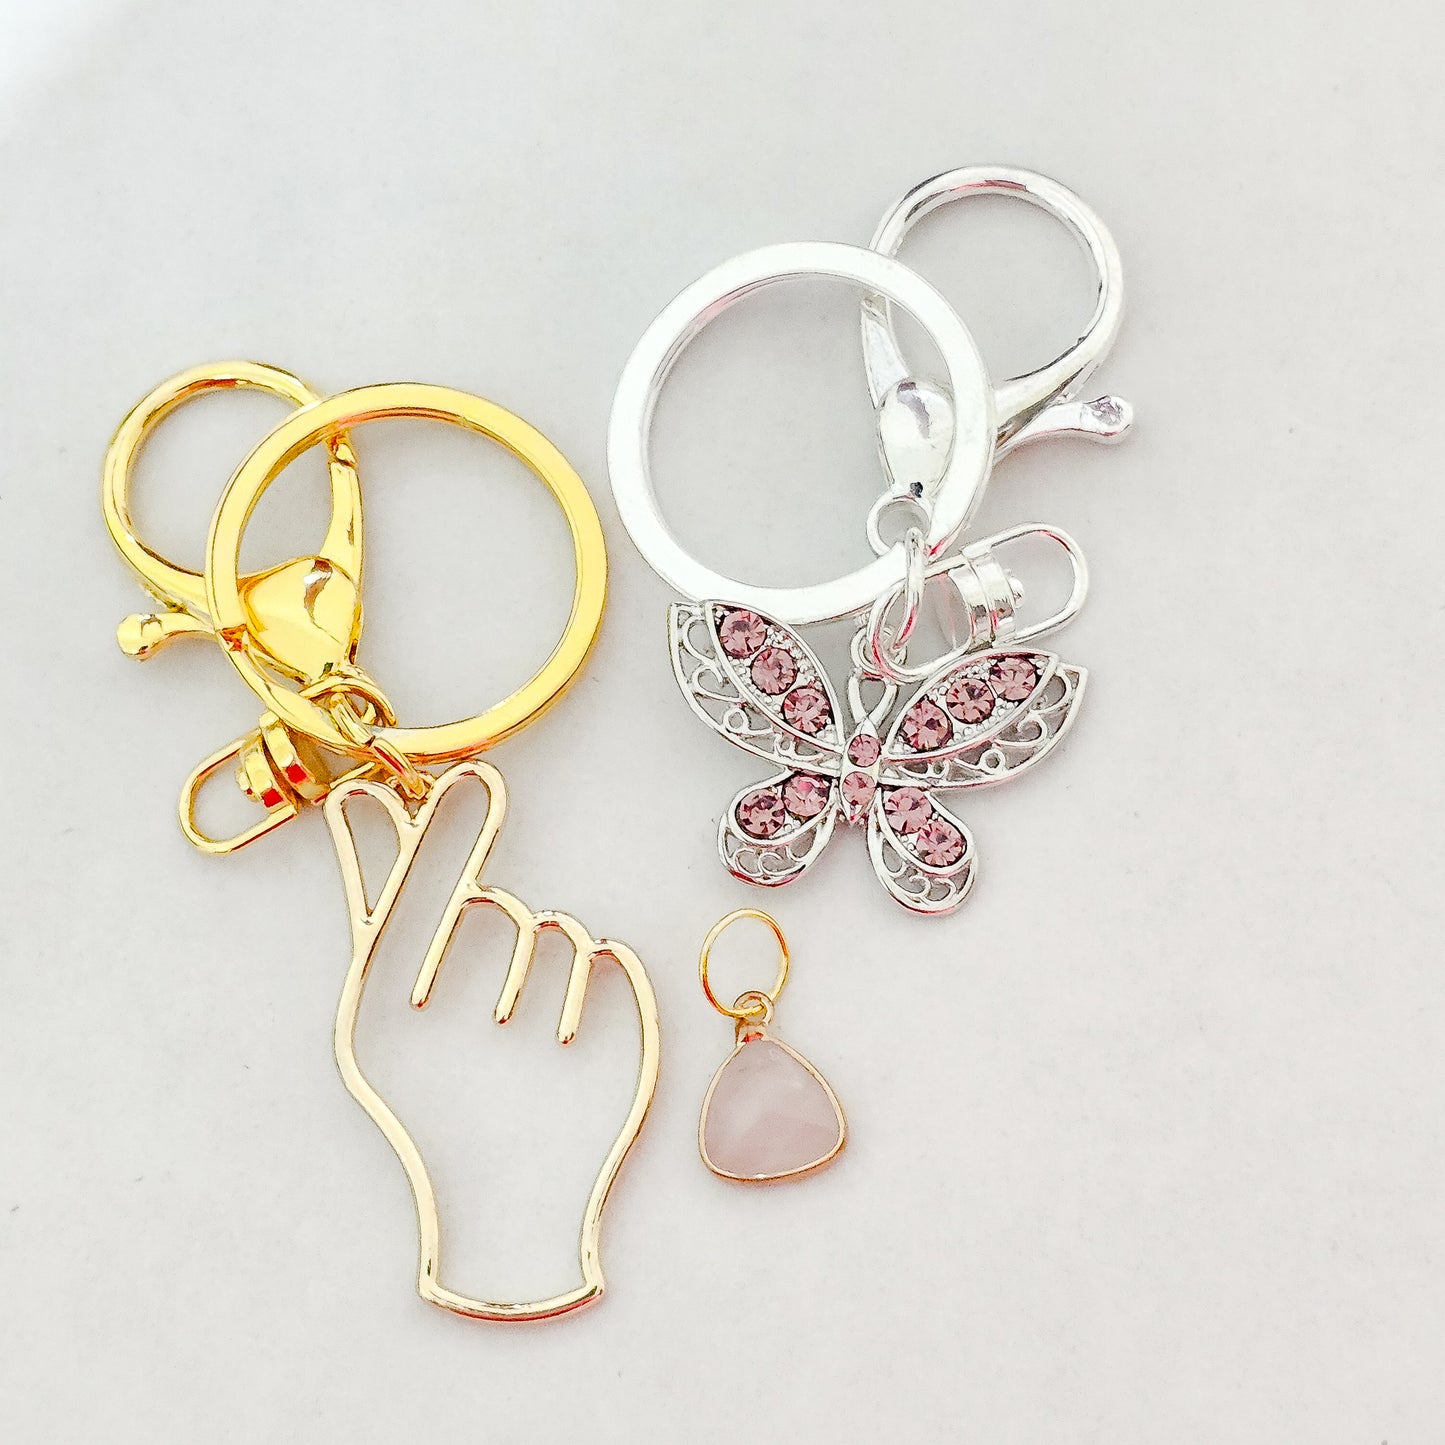 Love Crystal Confetti with added keychain and pendant/charm.